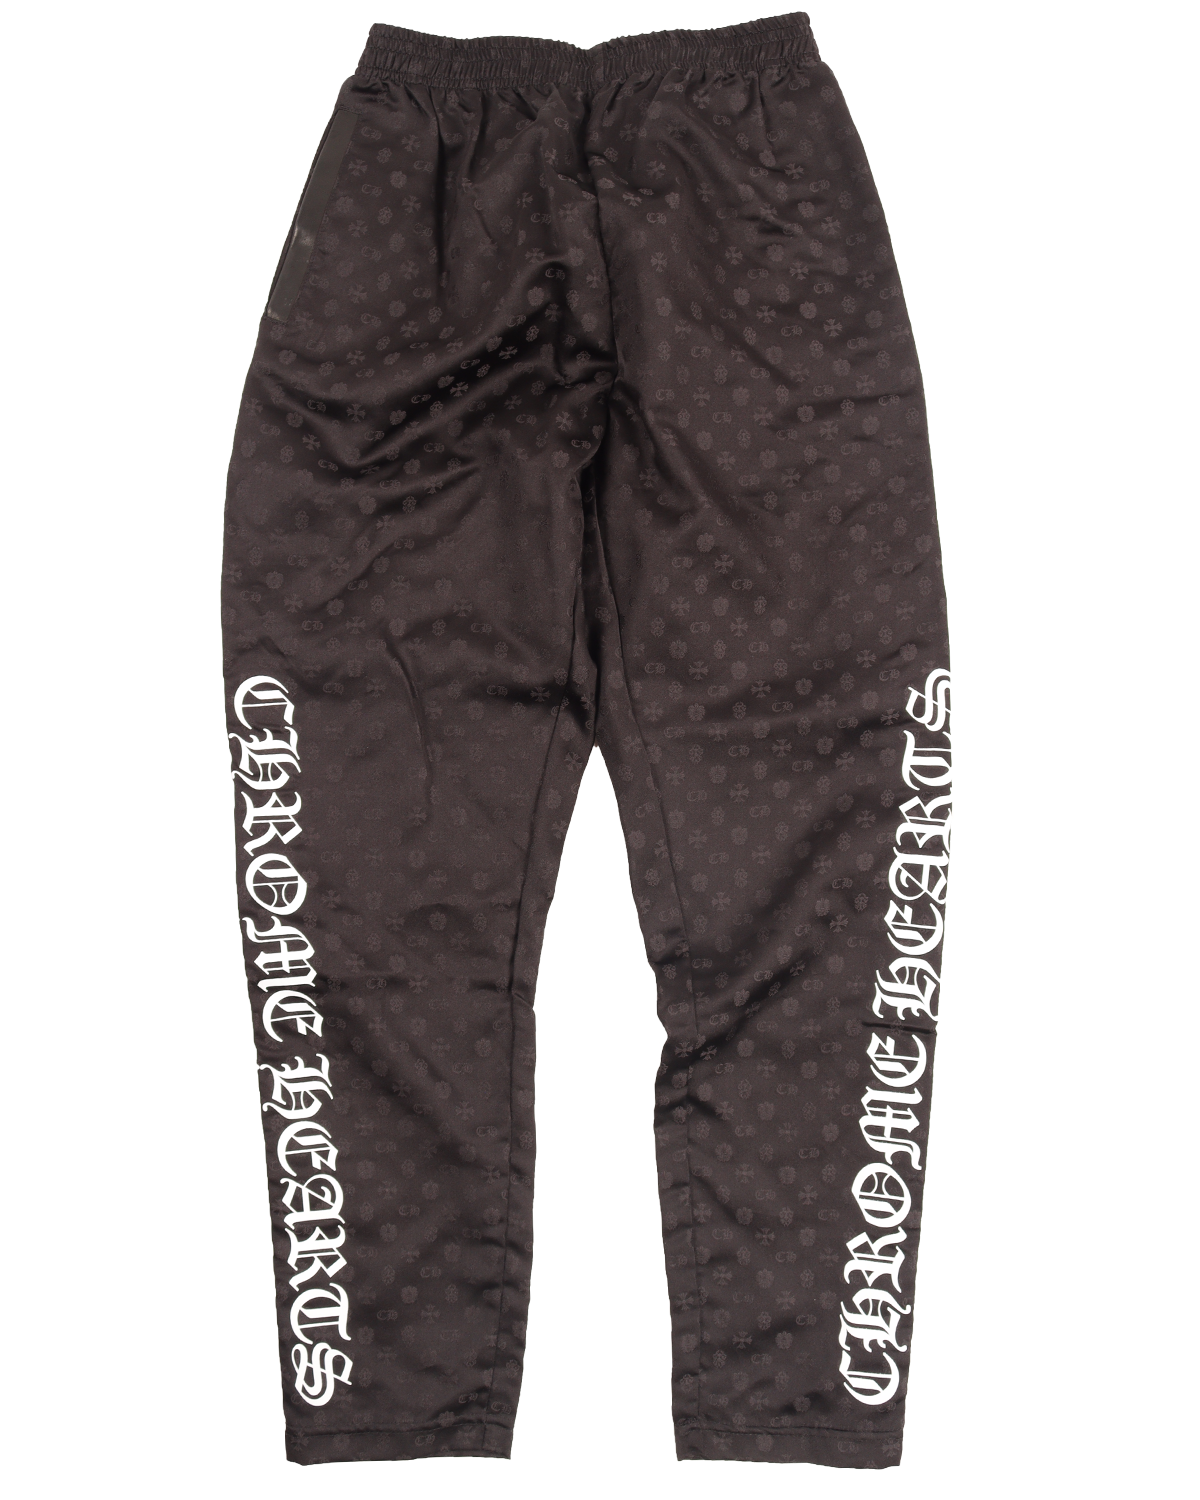 Silk Snap Button Track Pants